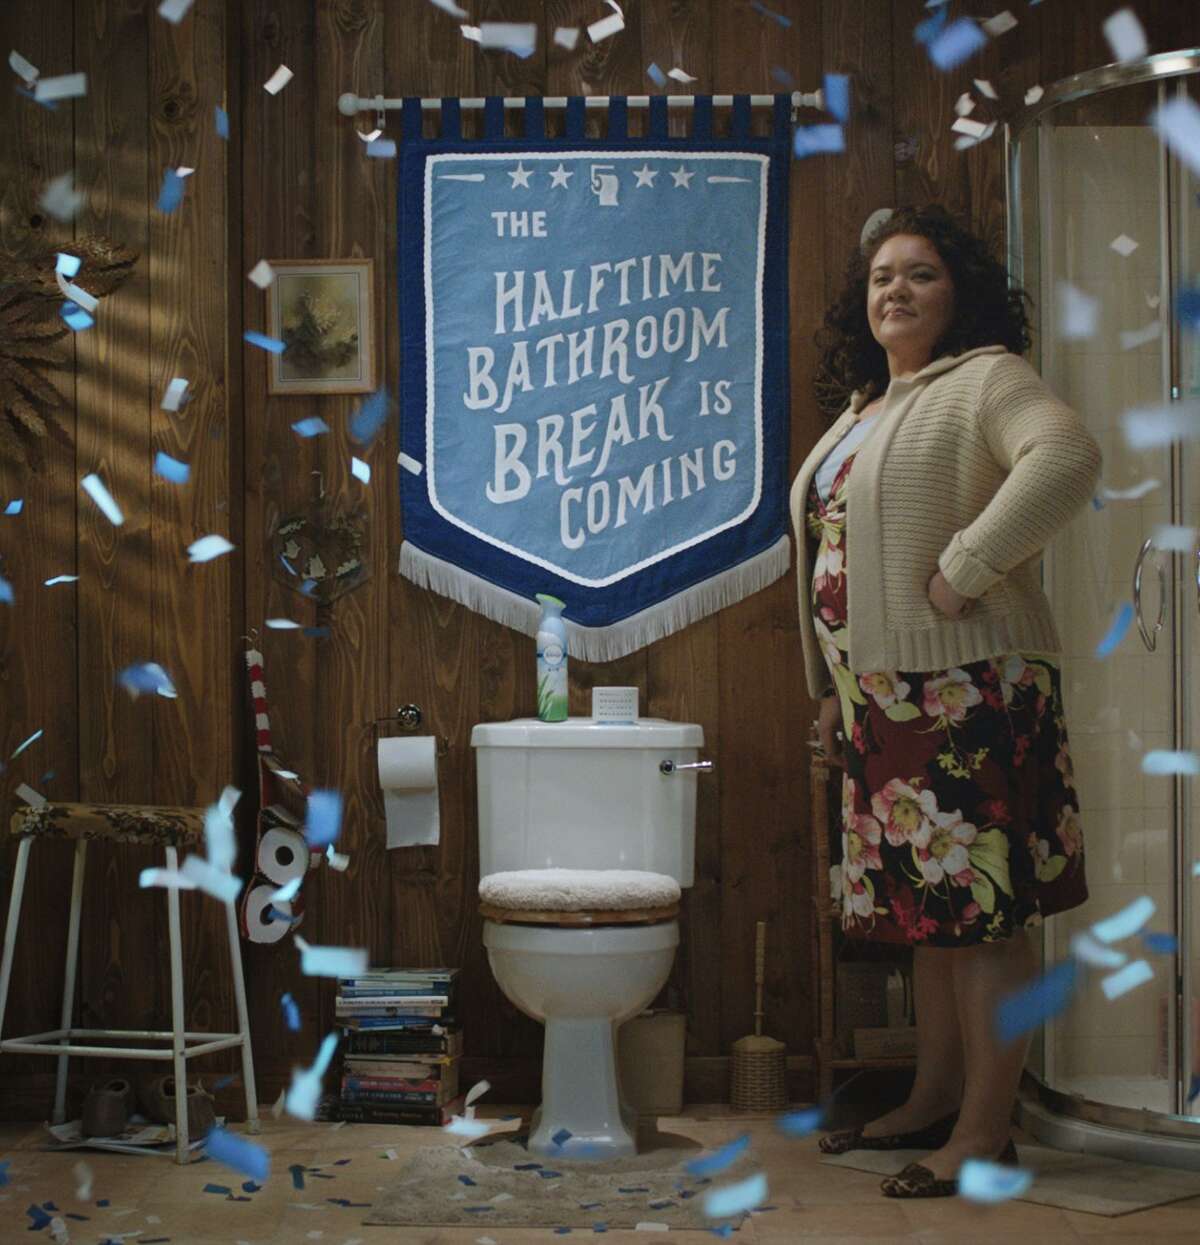 Not everyone found the “potty humor” of P&G’s salute to the halftime bathroom break appealing.